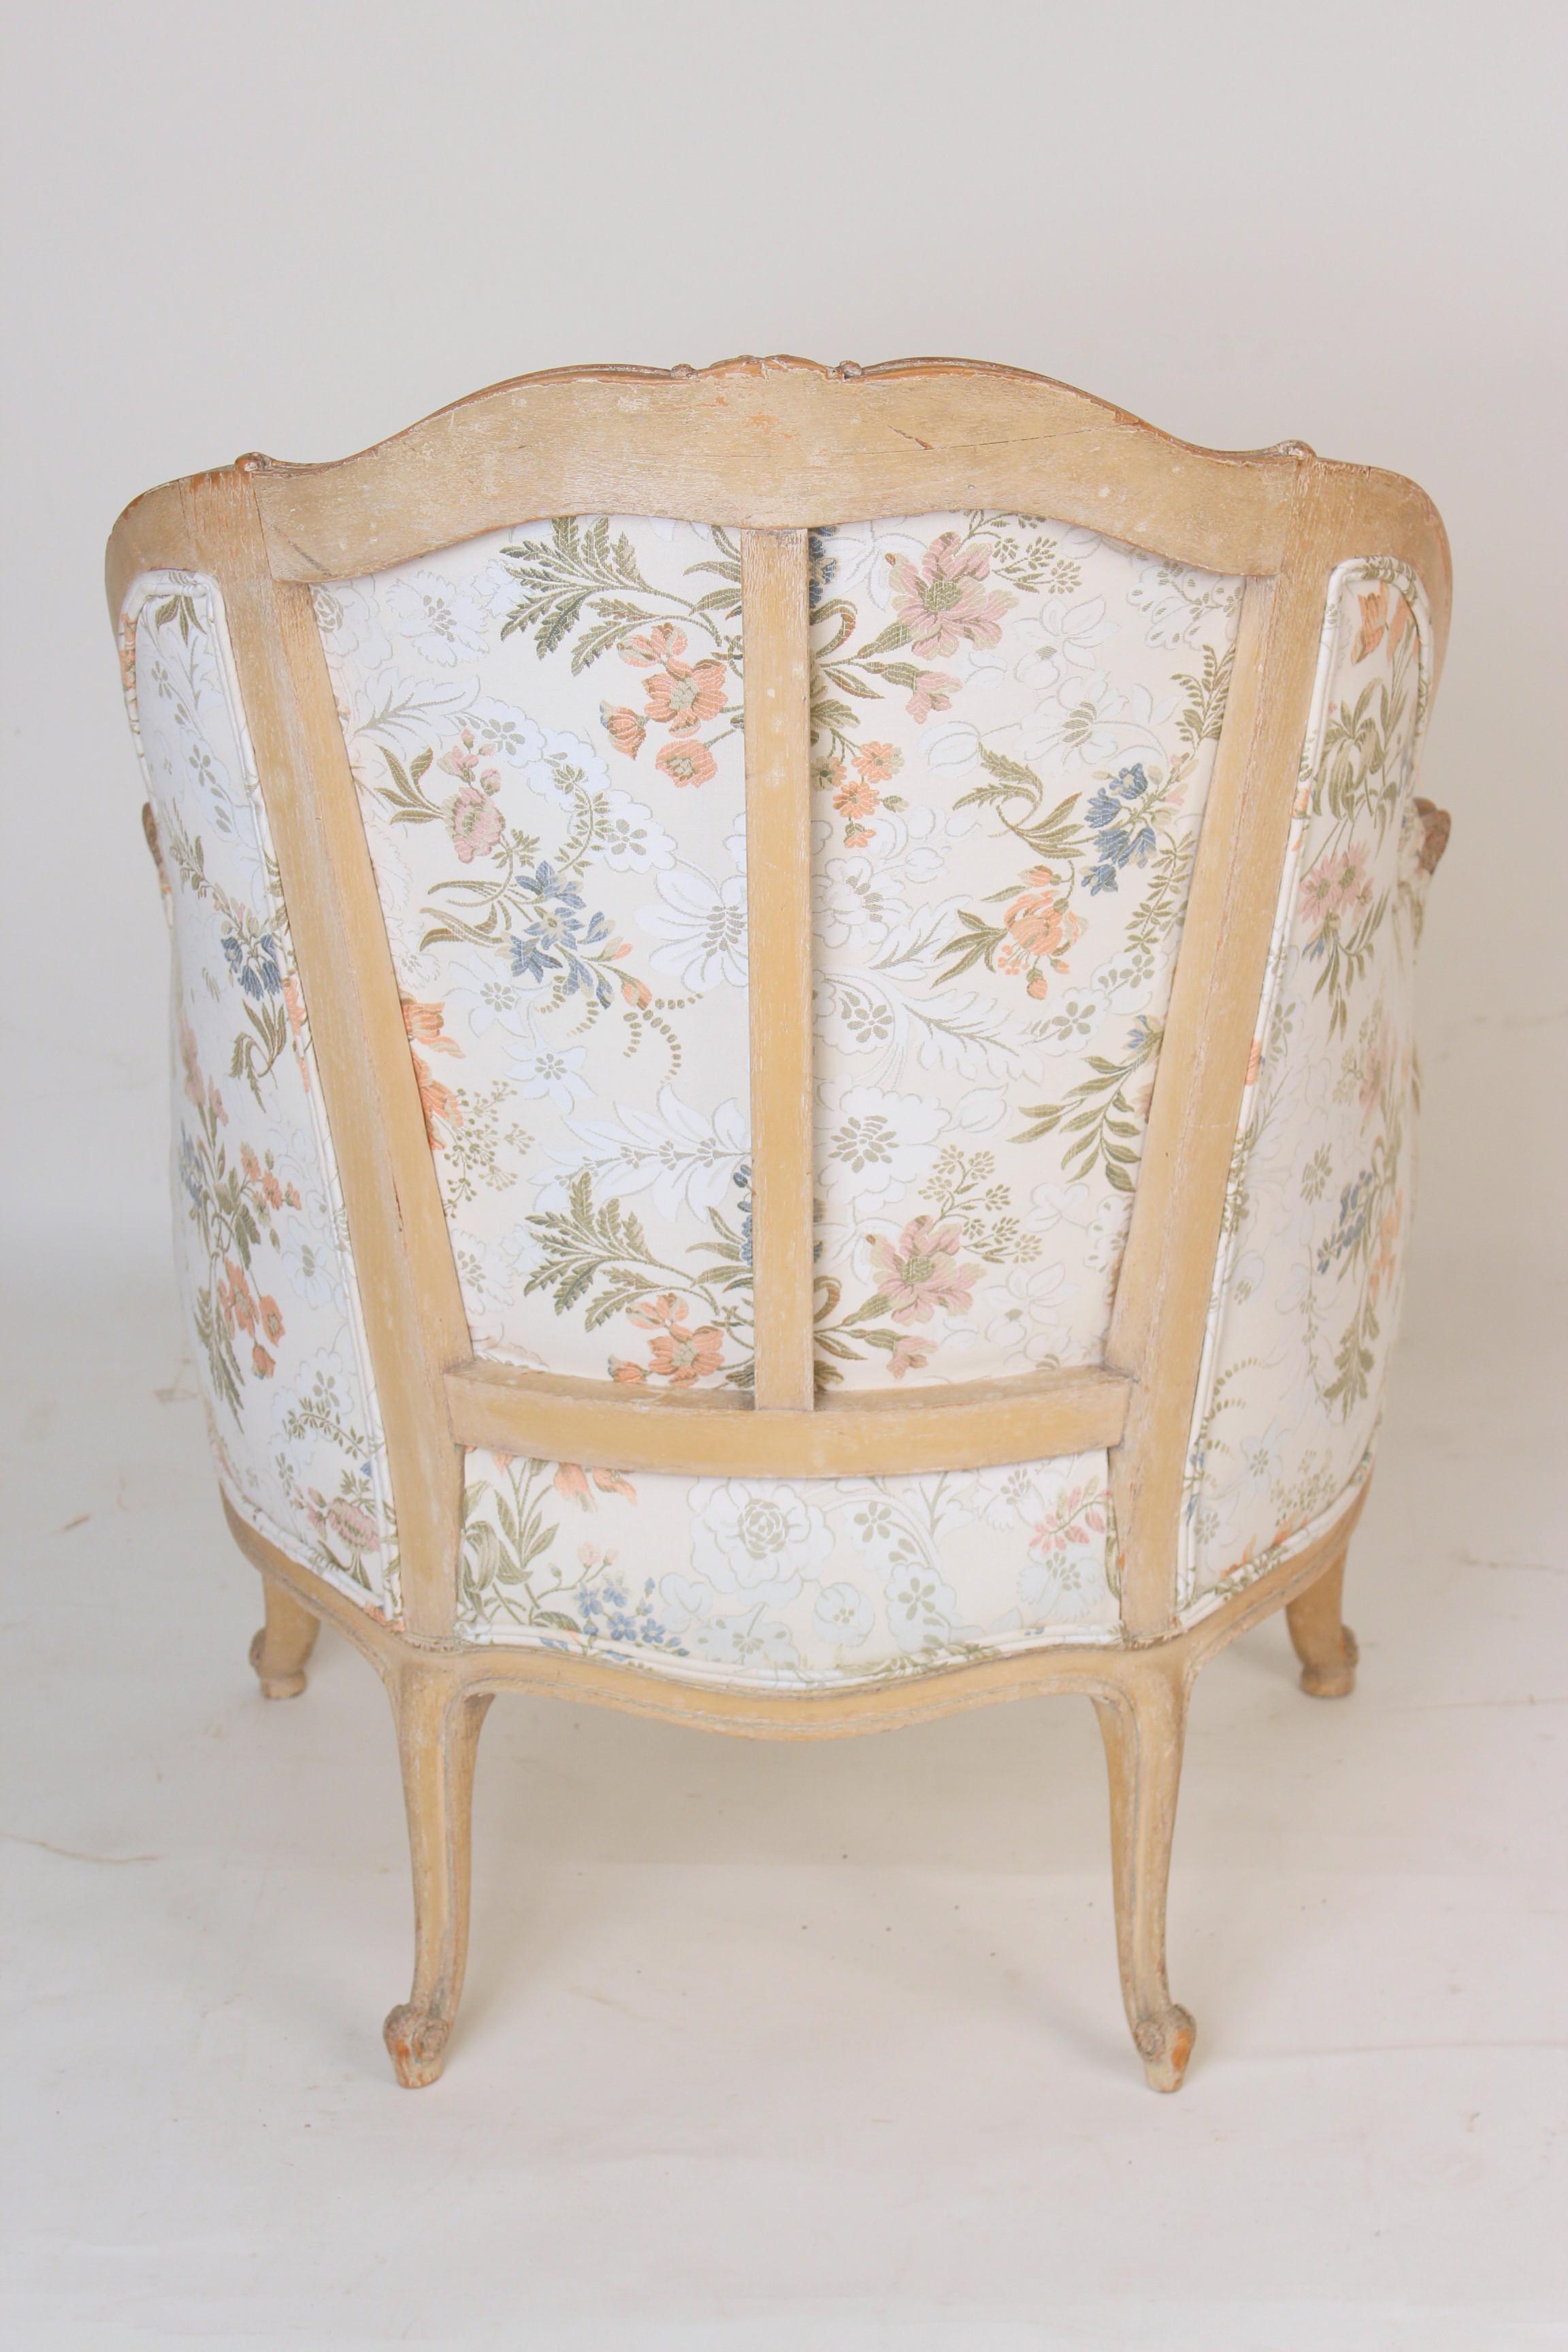 20th Century Louis XV Style Bergere with Pickled Finish